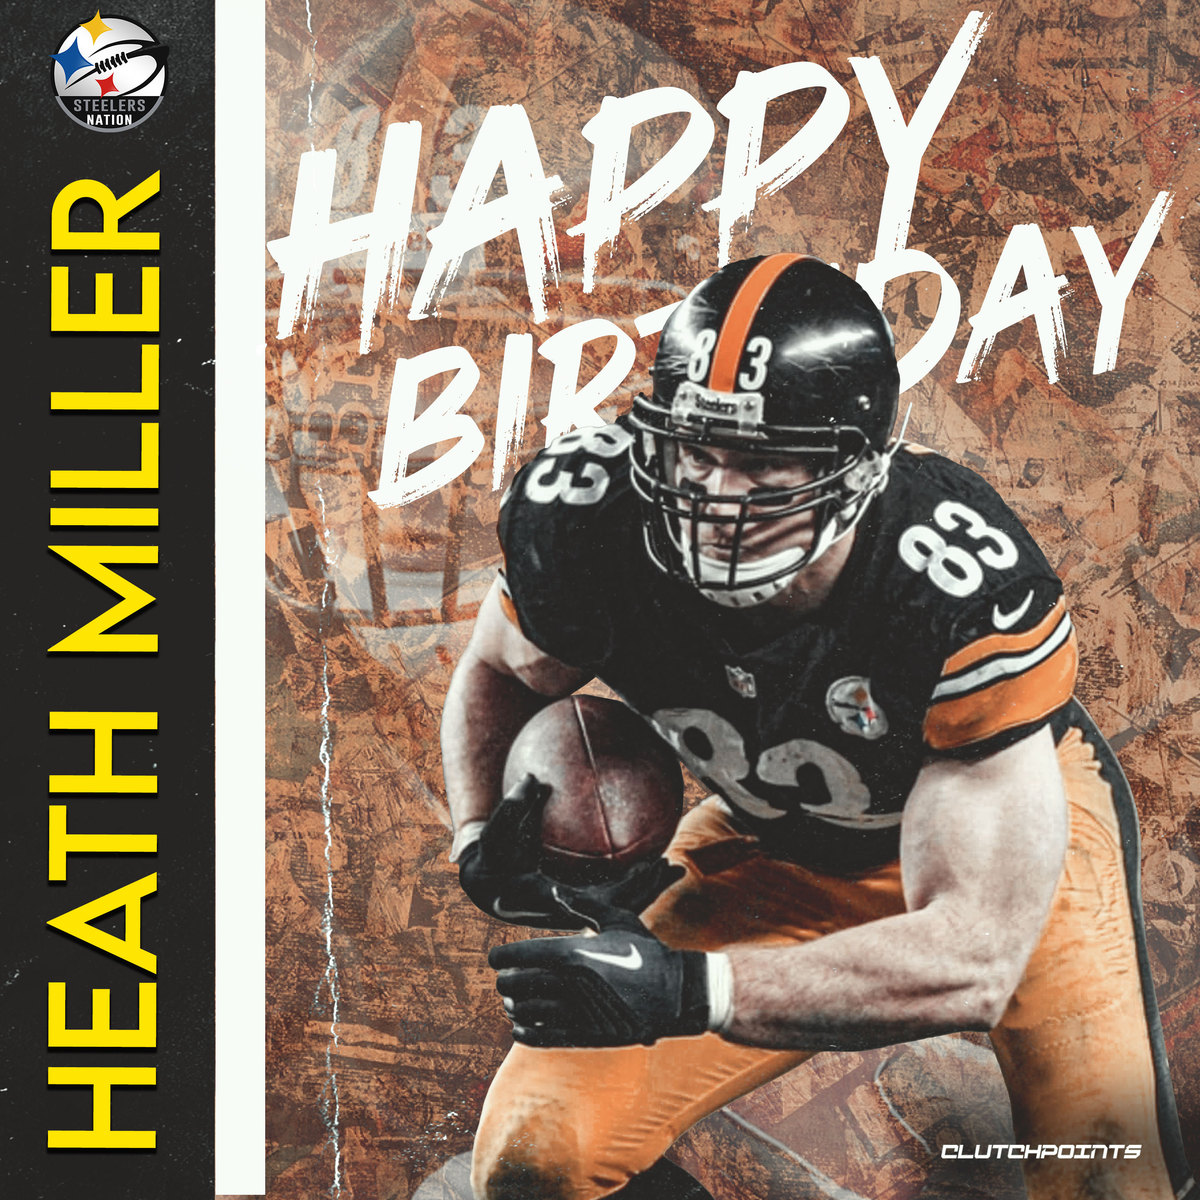 Join Steelers Nation in greeting 2X Super Bowl Champion and 2X Pro Bowler Heath Miller a happy 39th birthday!  